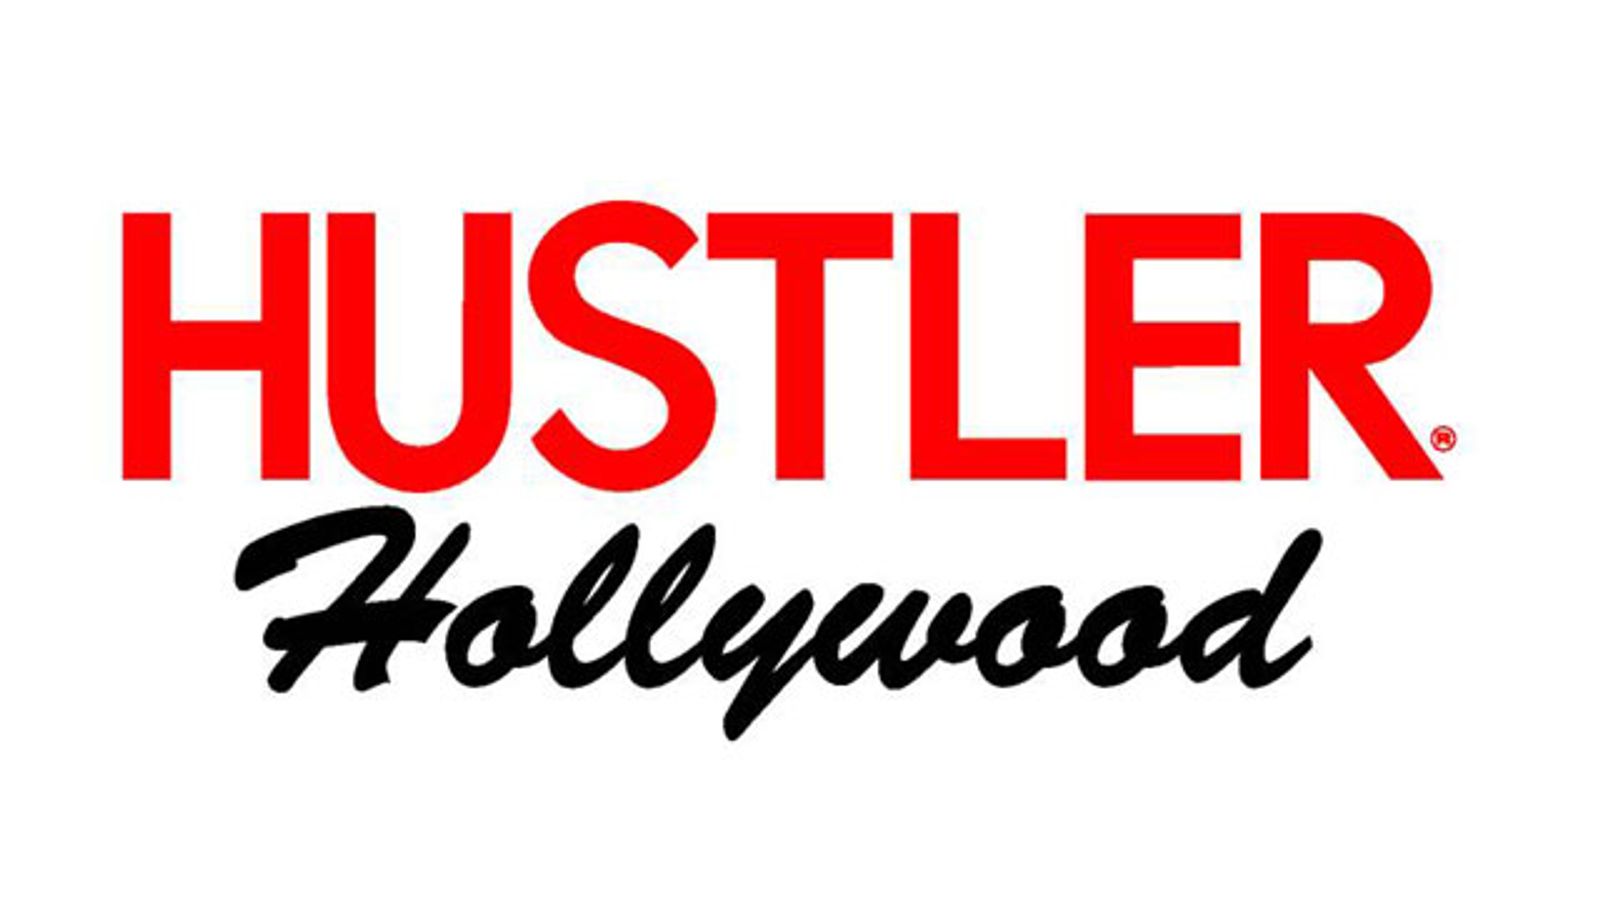 Hustler Hollywood Store Planned for Clintonville, Ohio